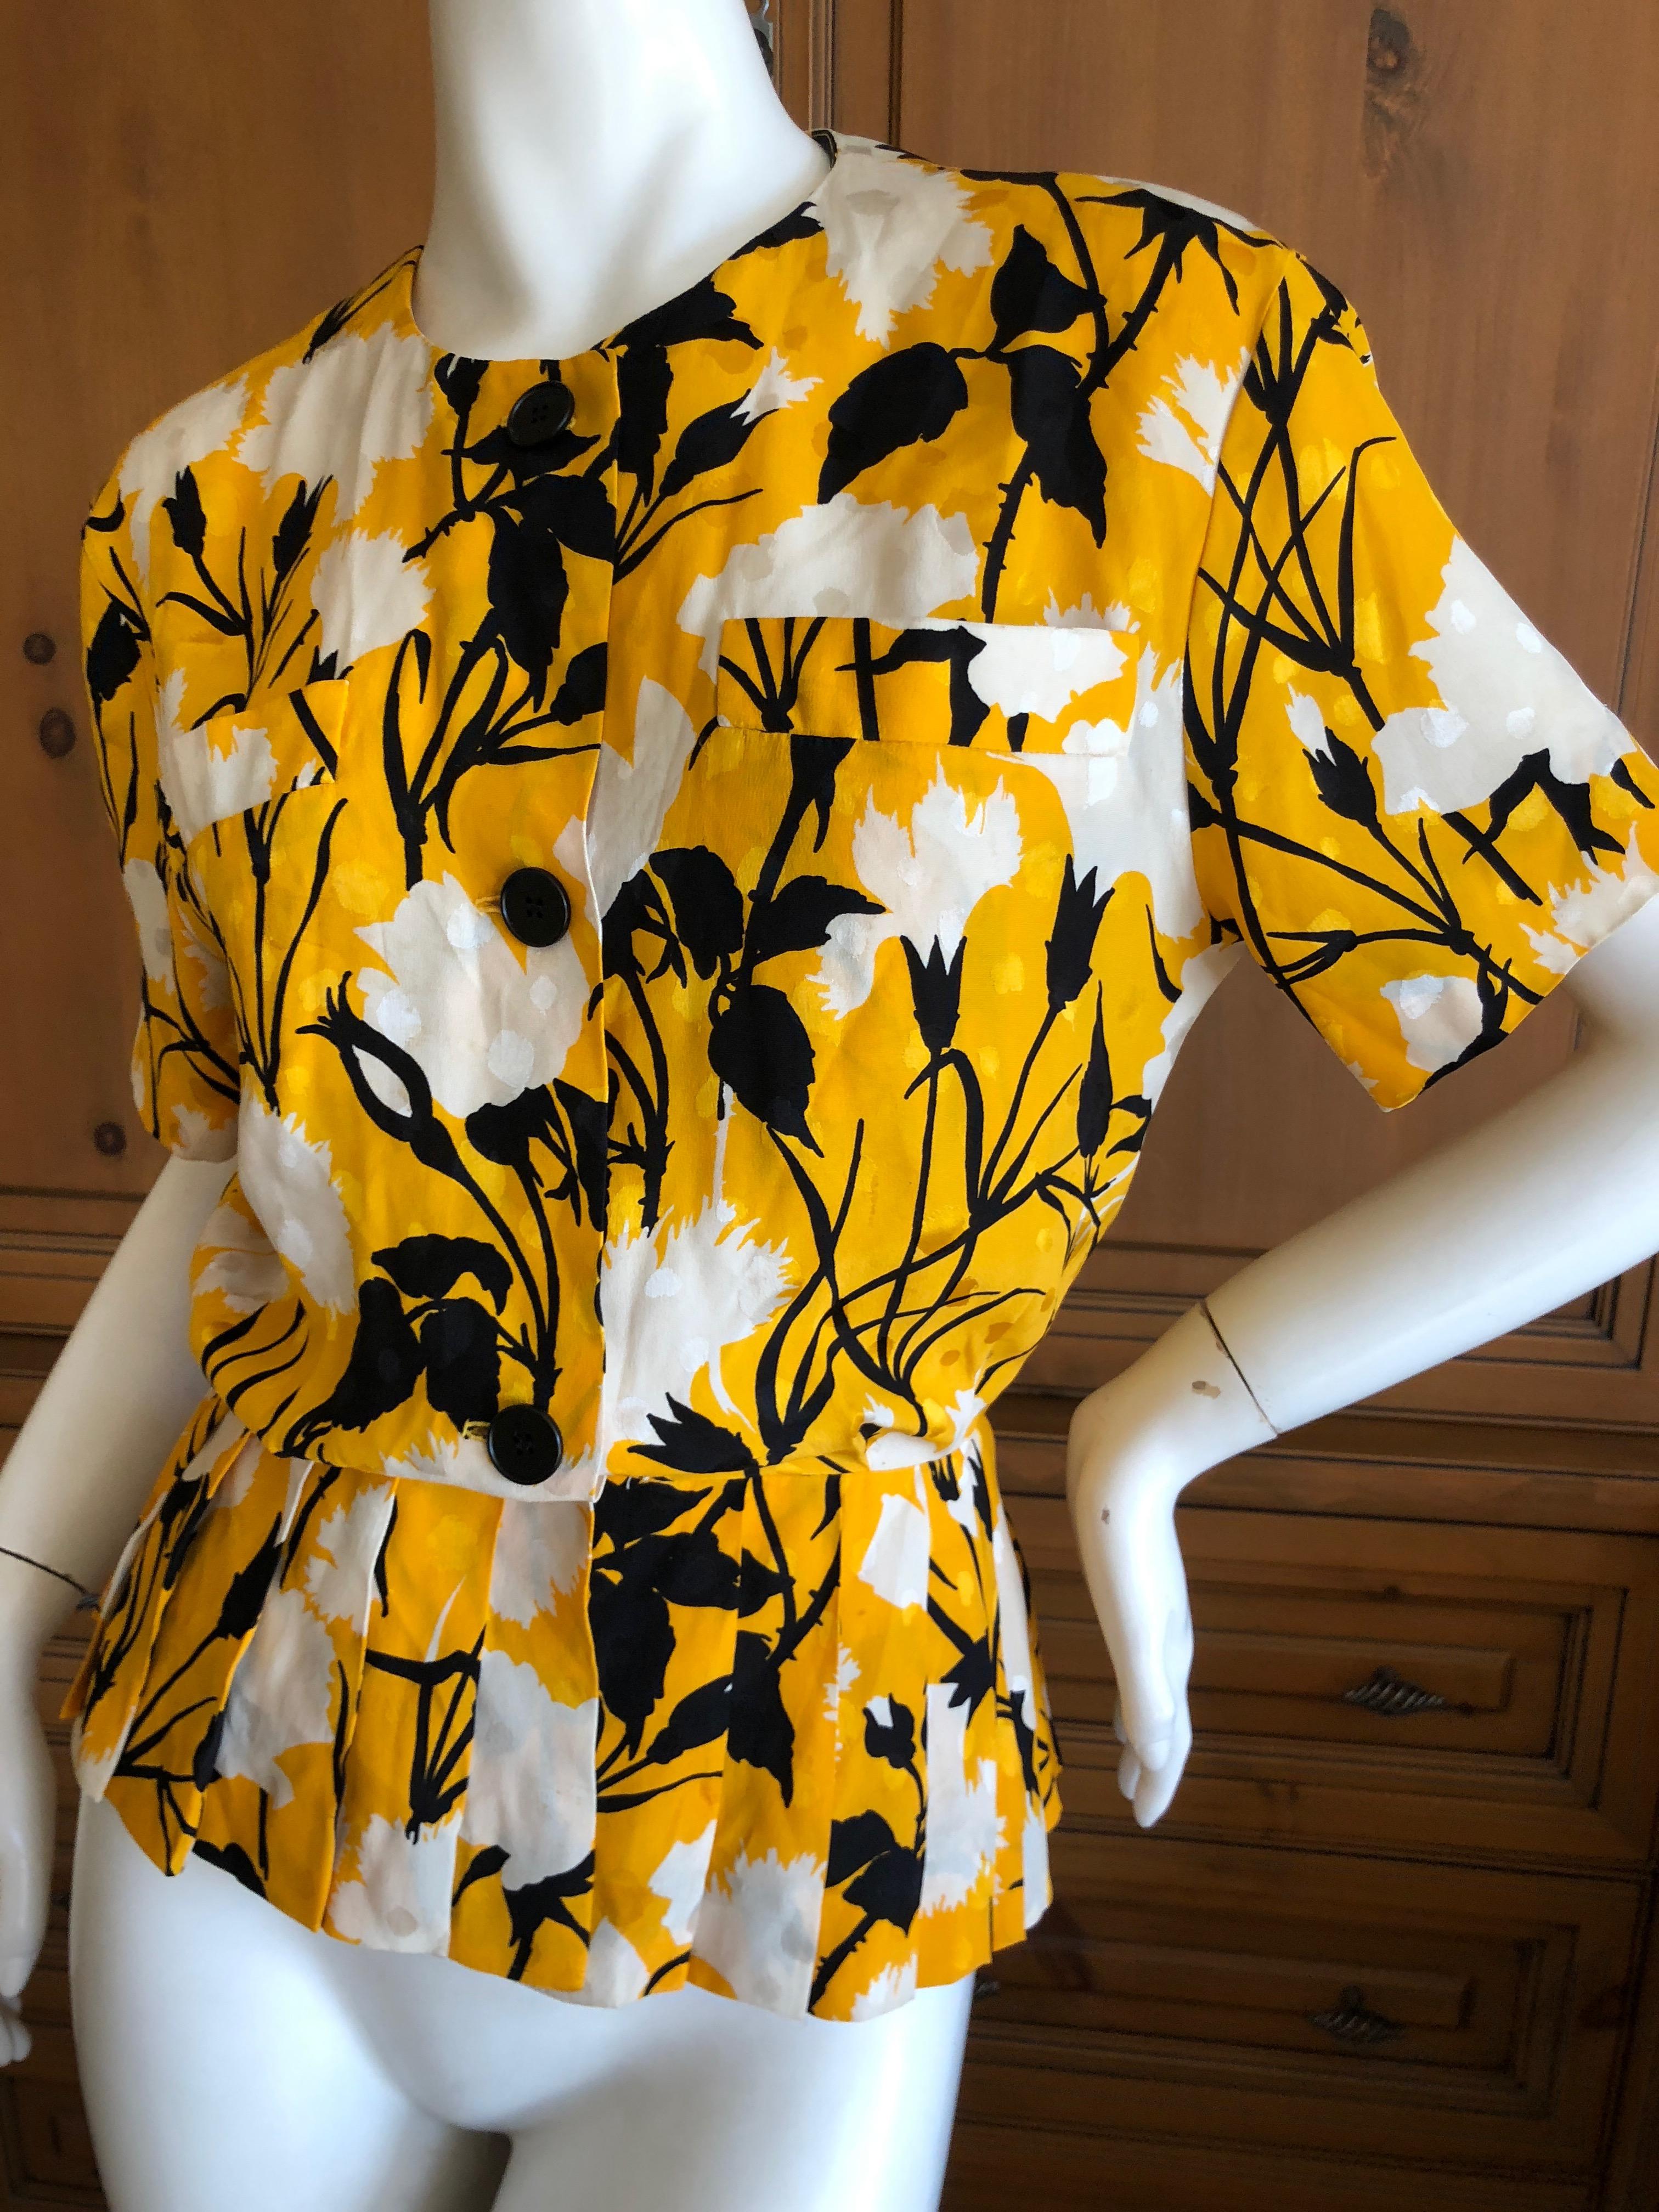 Christian Dior by Gianfranco Ferre Blossom Pattern Silk Top with Pleated Peplum In Excellent Condition For Sale In Cloverdale, CA